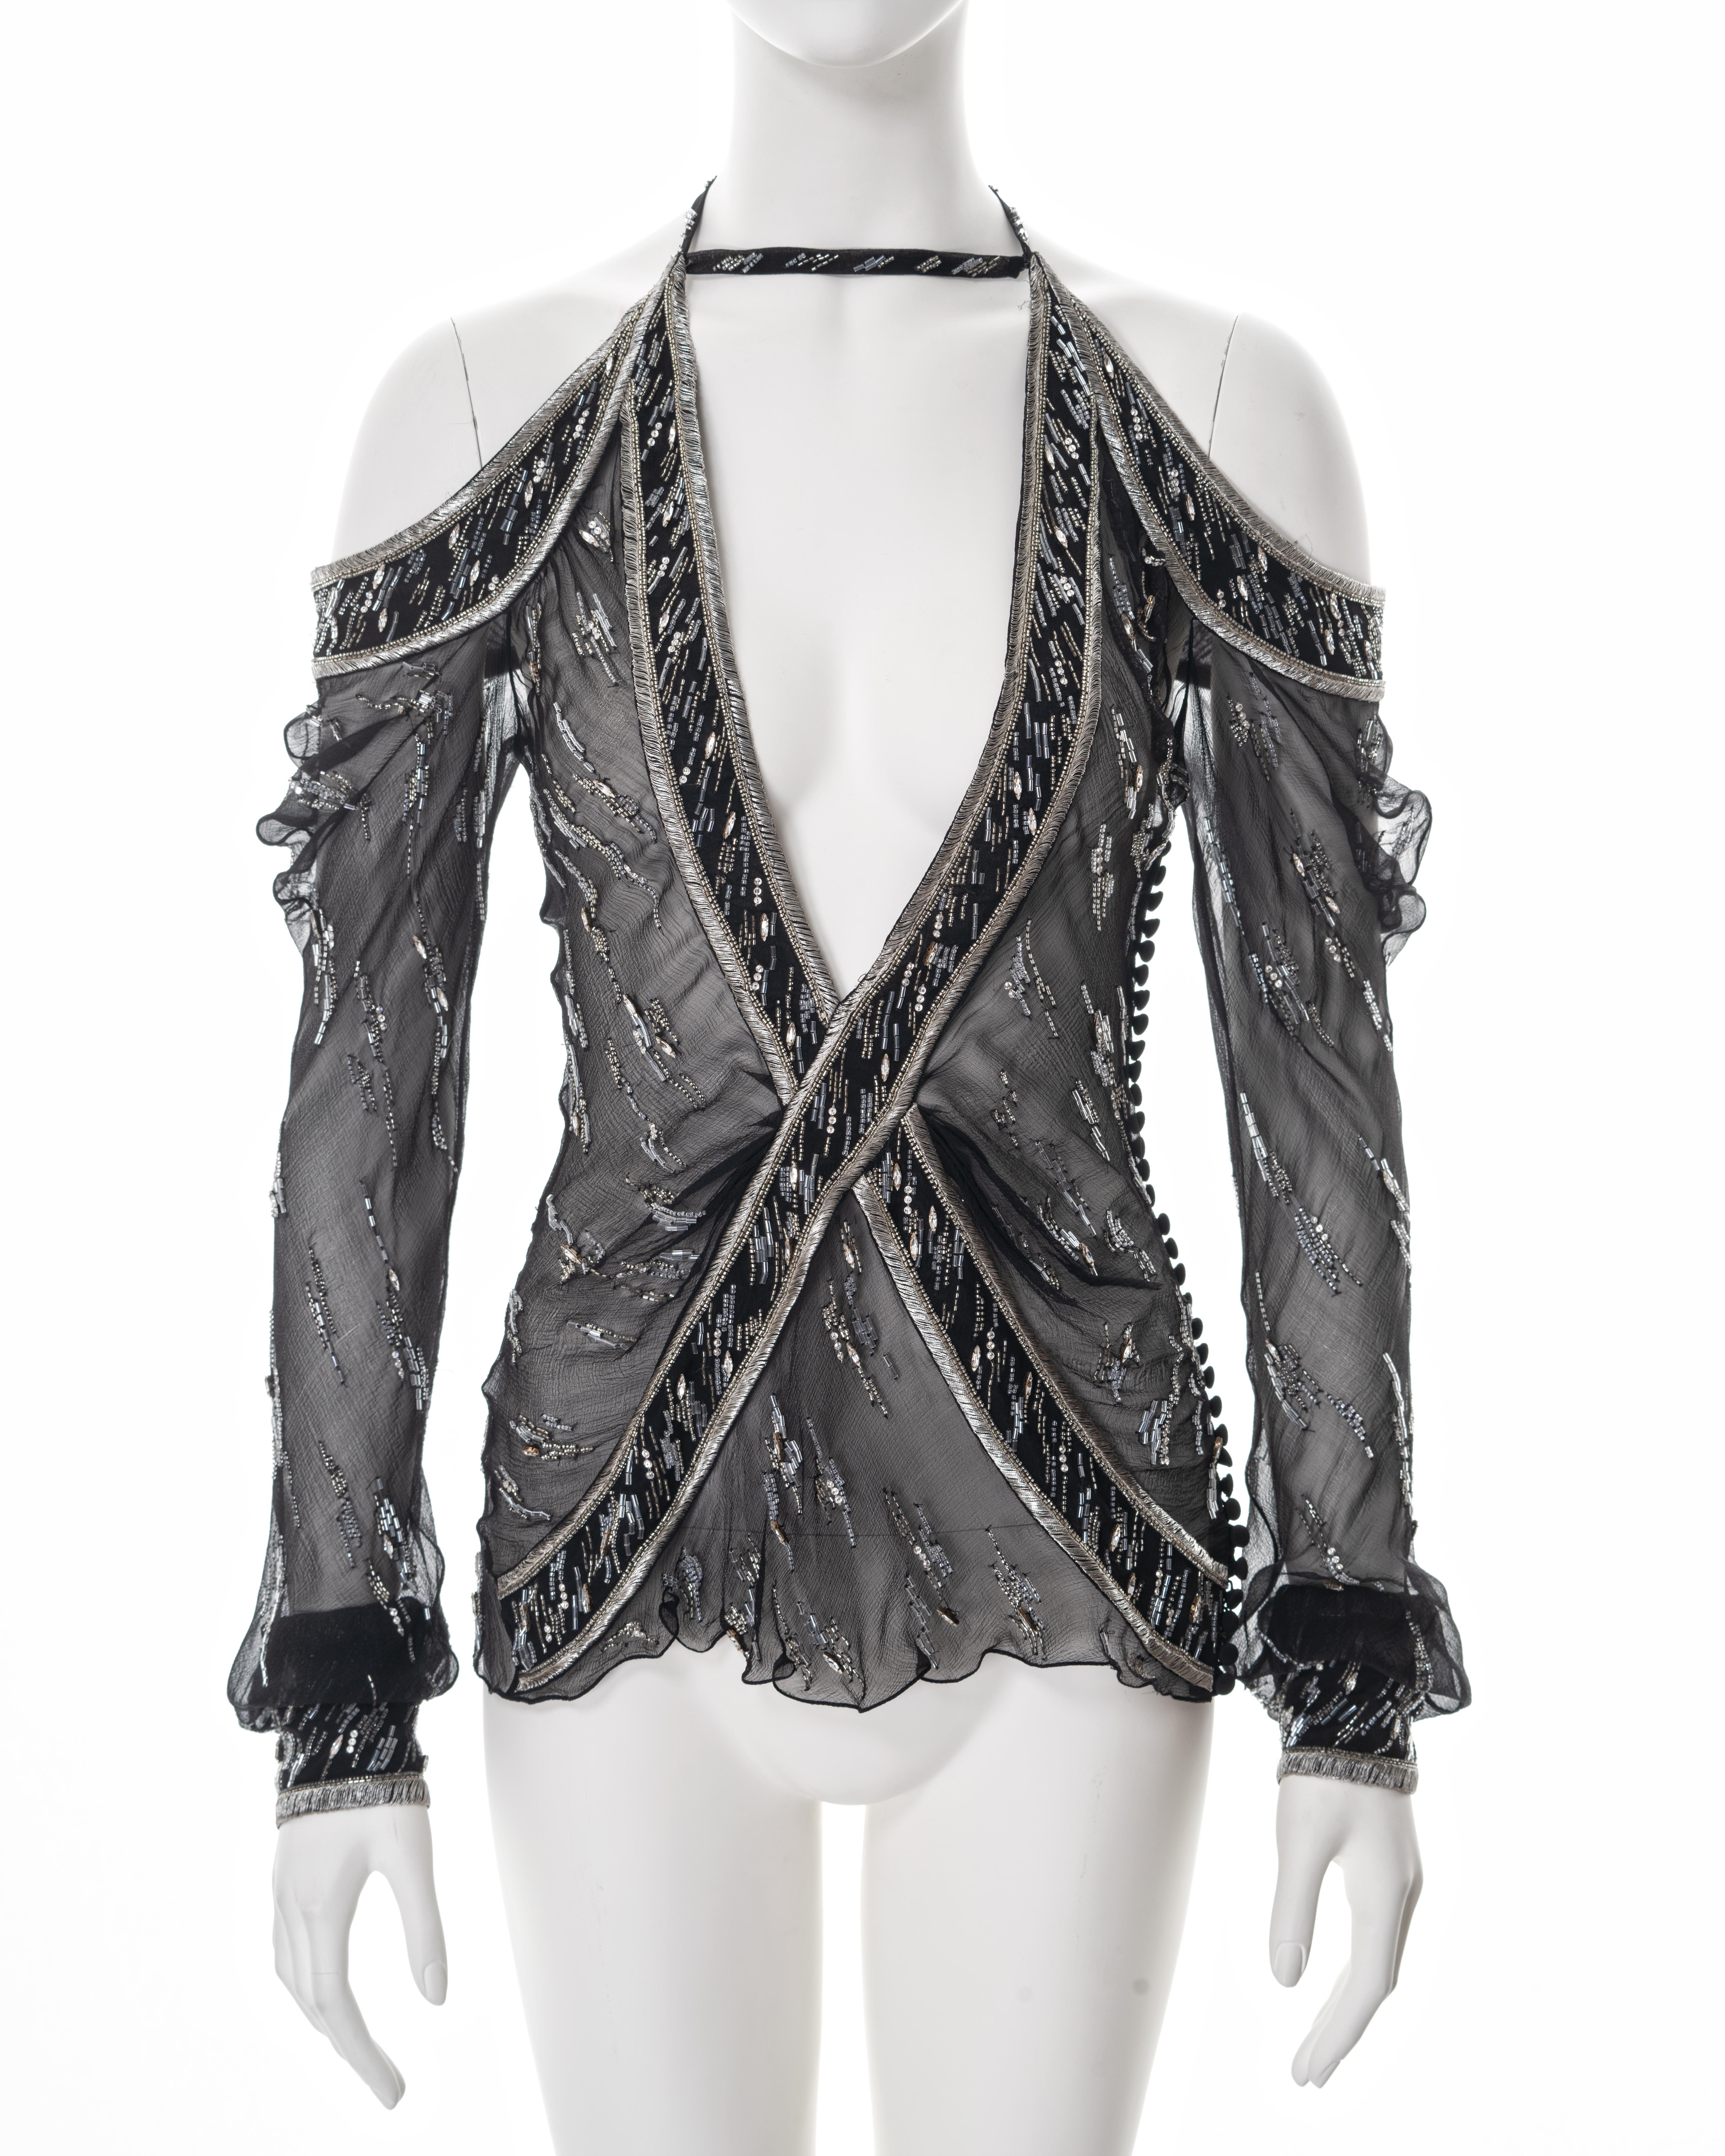 Women's Christian Dior by John Galliano embellished silk evening blouse, ss 2005